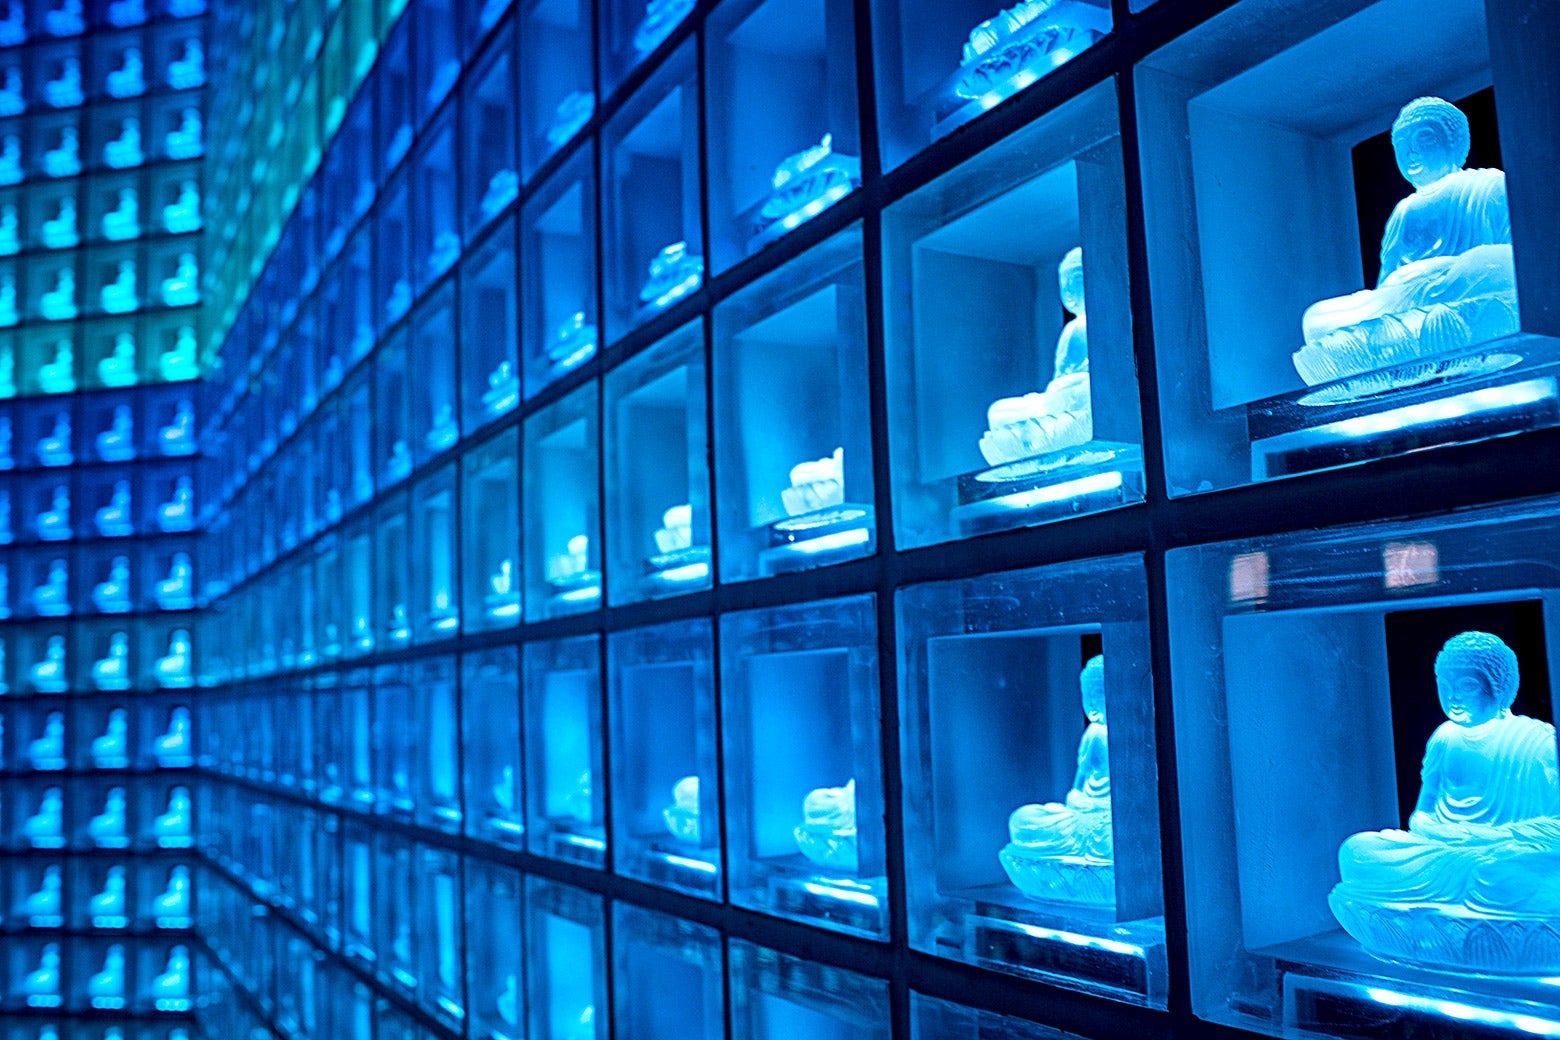 Rows and rows of glass Buddha statuettes in square altars lit up on a wall